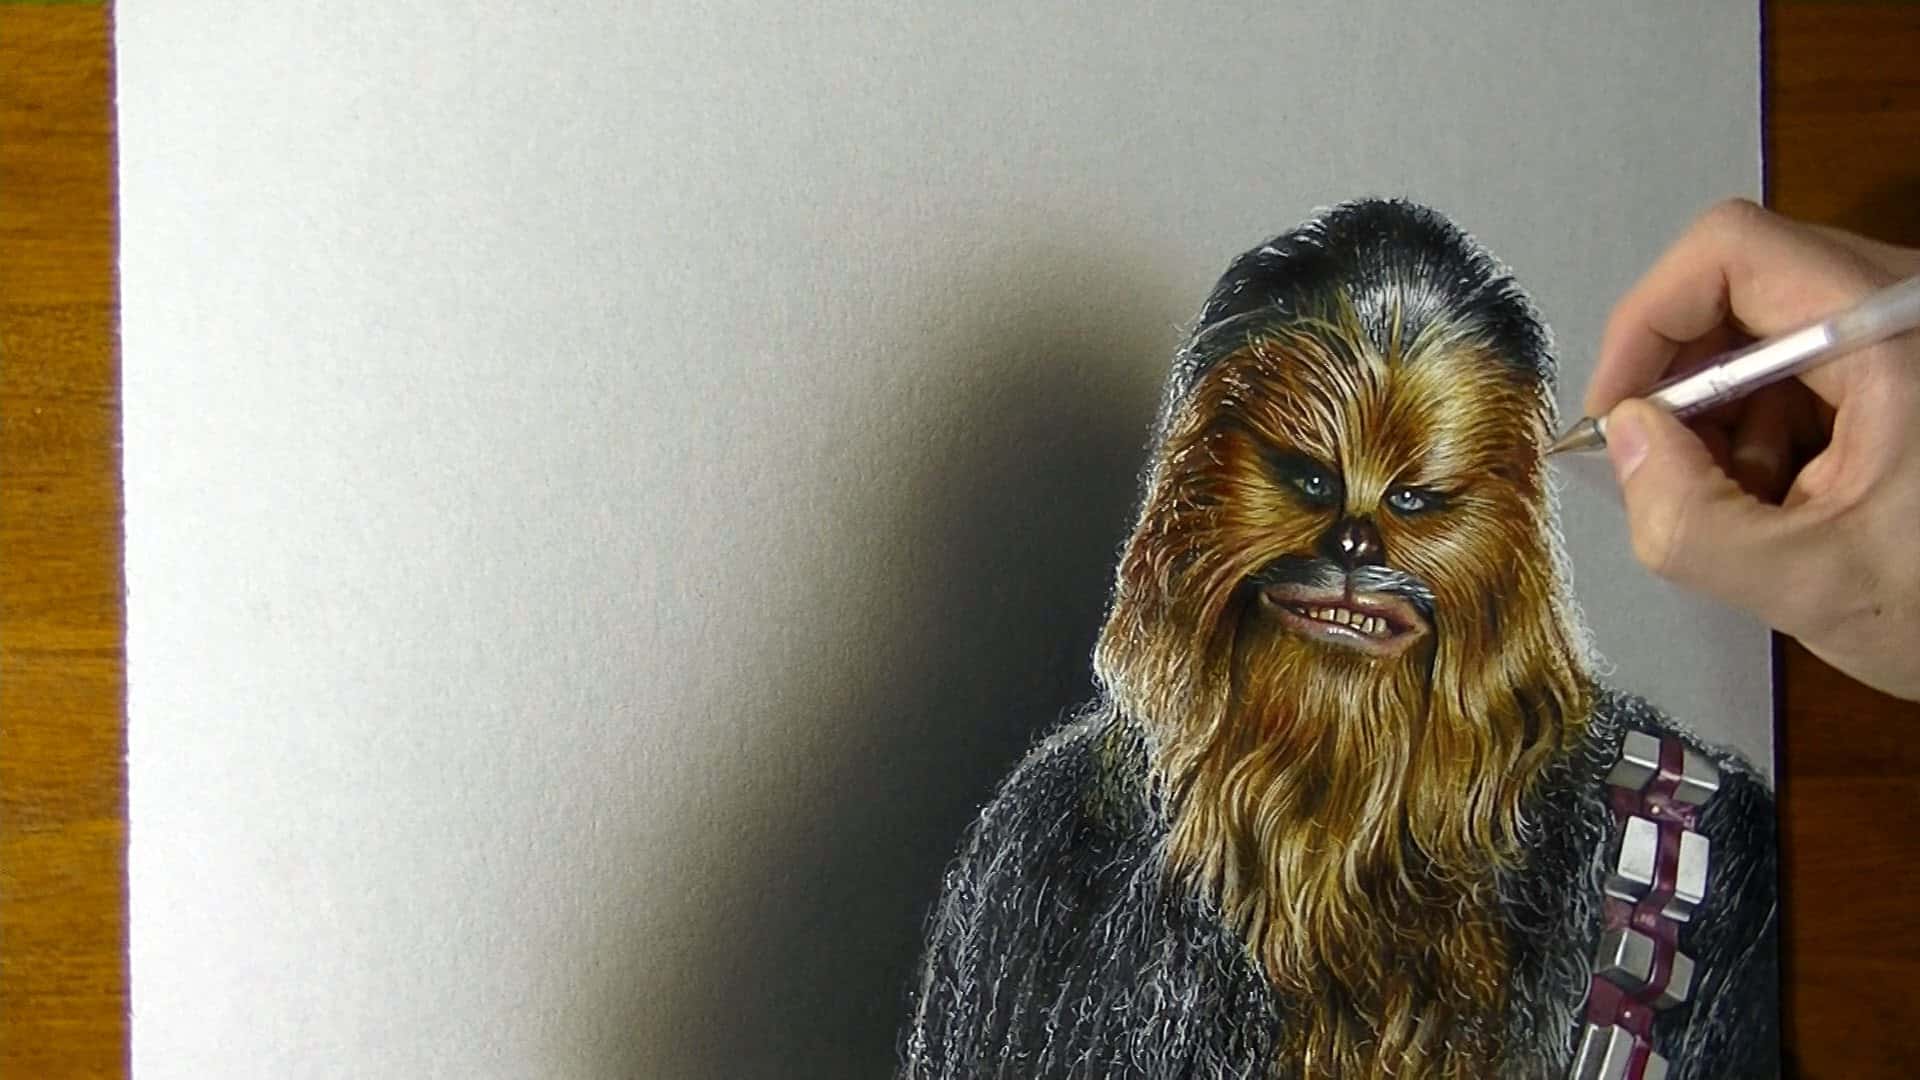 Chewbacca facts